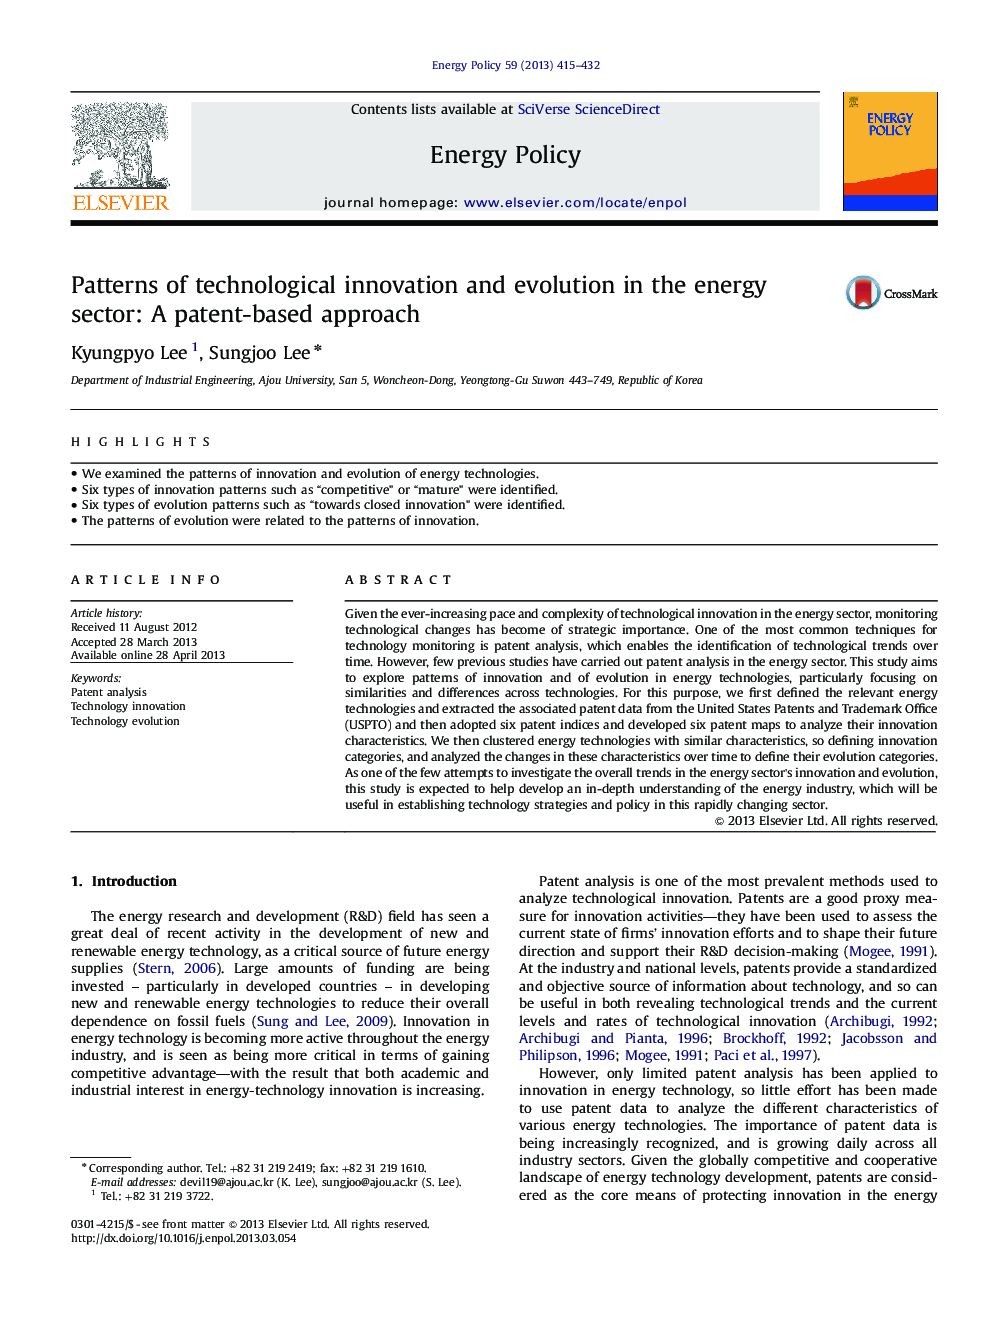 Patterns of technological innovation and evolution in the energy sector: A patent-based approach